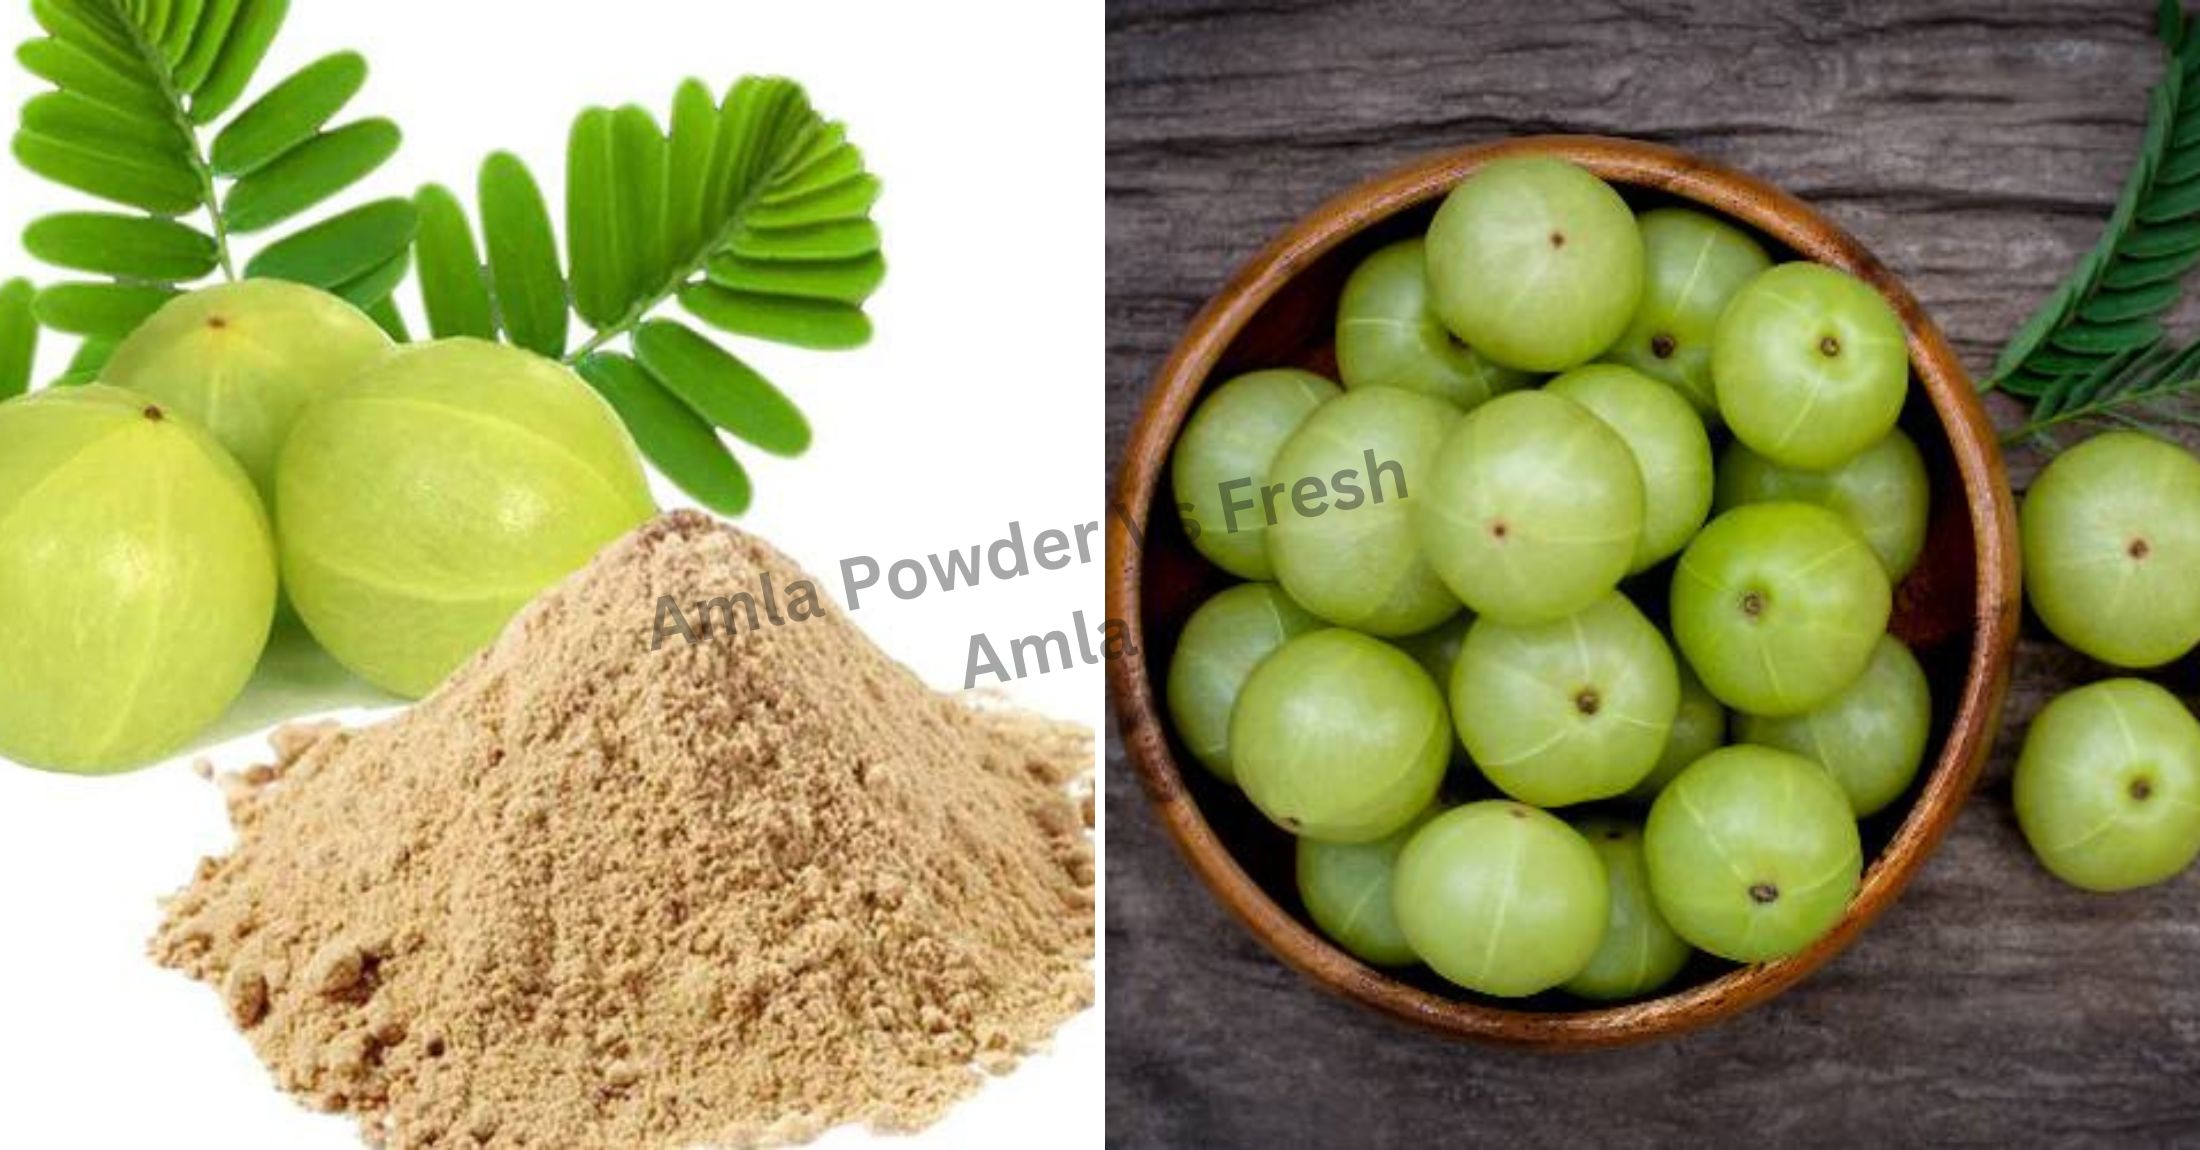 You are currently viewing Is Amla Powder As Good As Fresh Amla